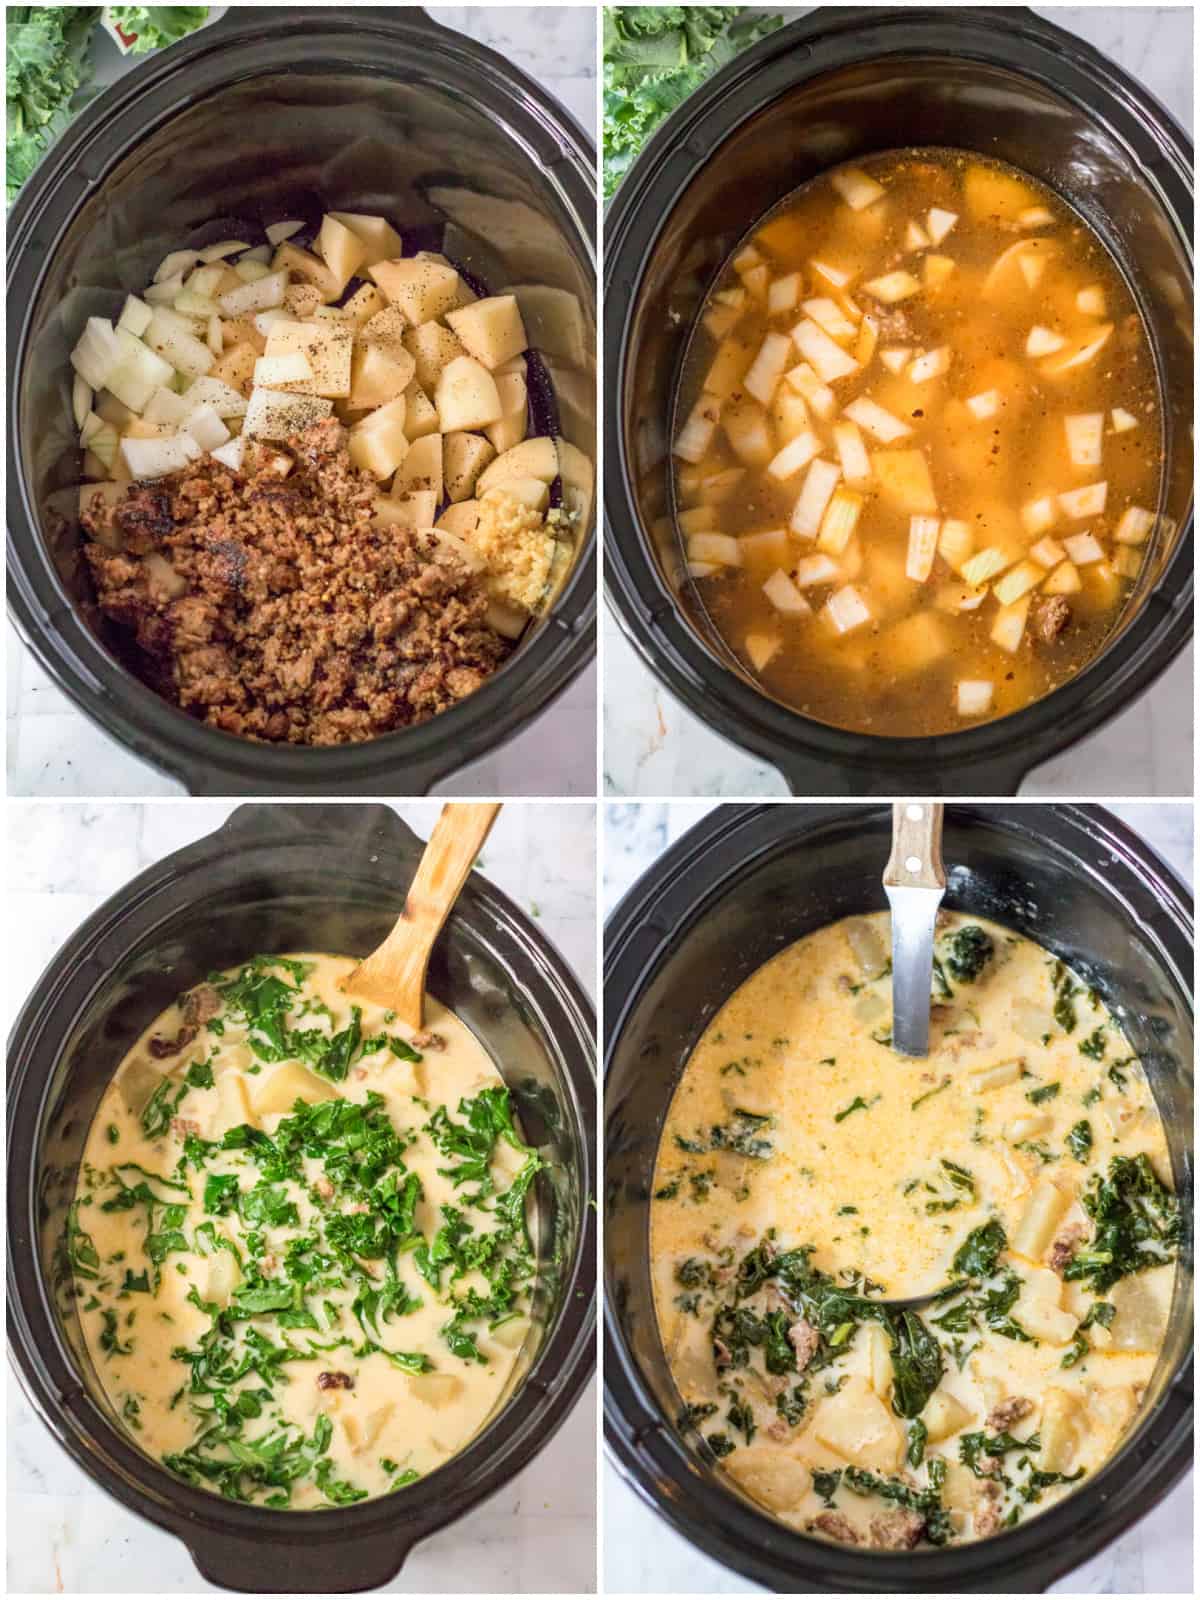 Step by step photos on how to make Slow Cooker Zuppa Toscana.